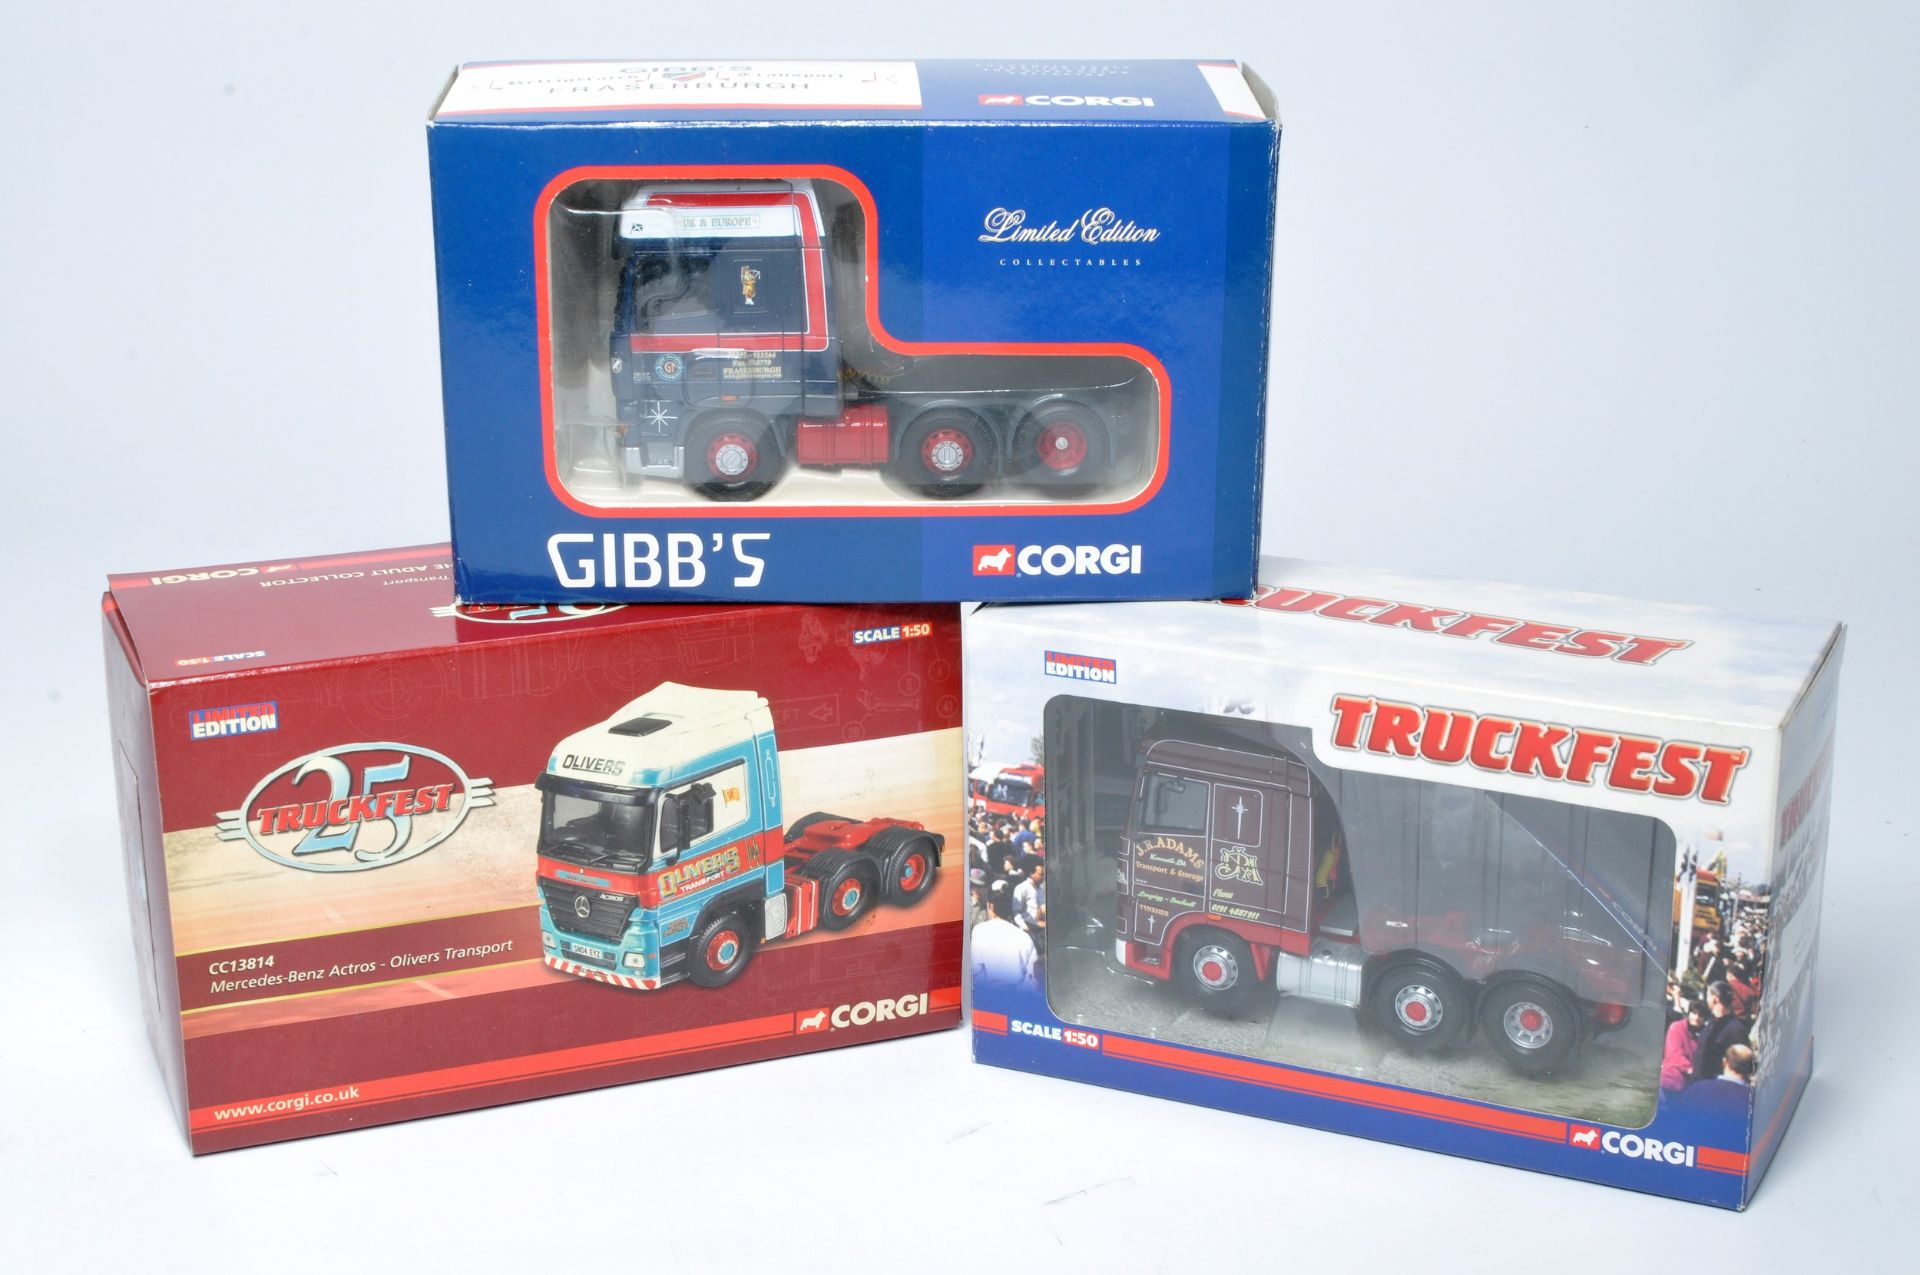 Corgi 1/50 diecast model truck issues x 3 comprising liveries of Adams, Olivers and Gibbs. As